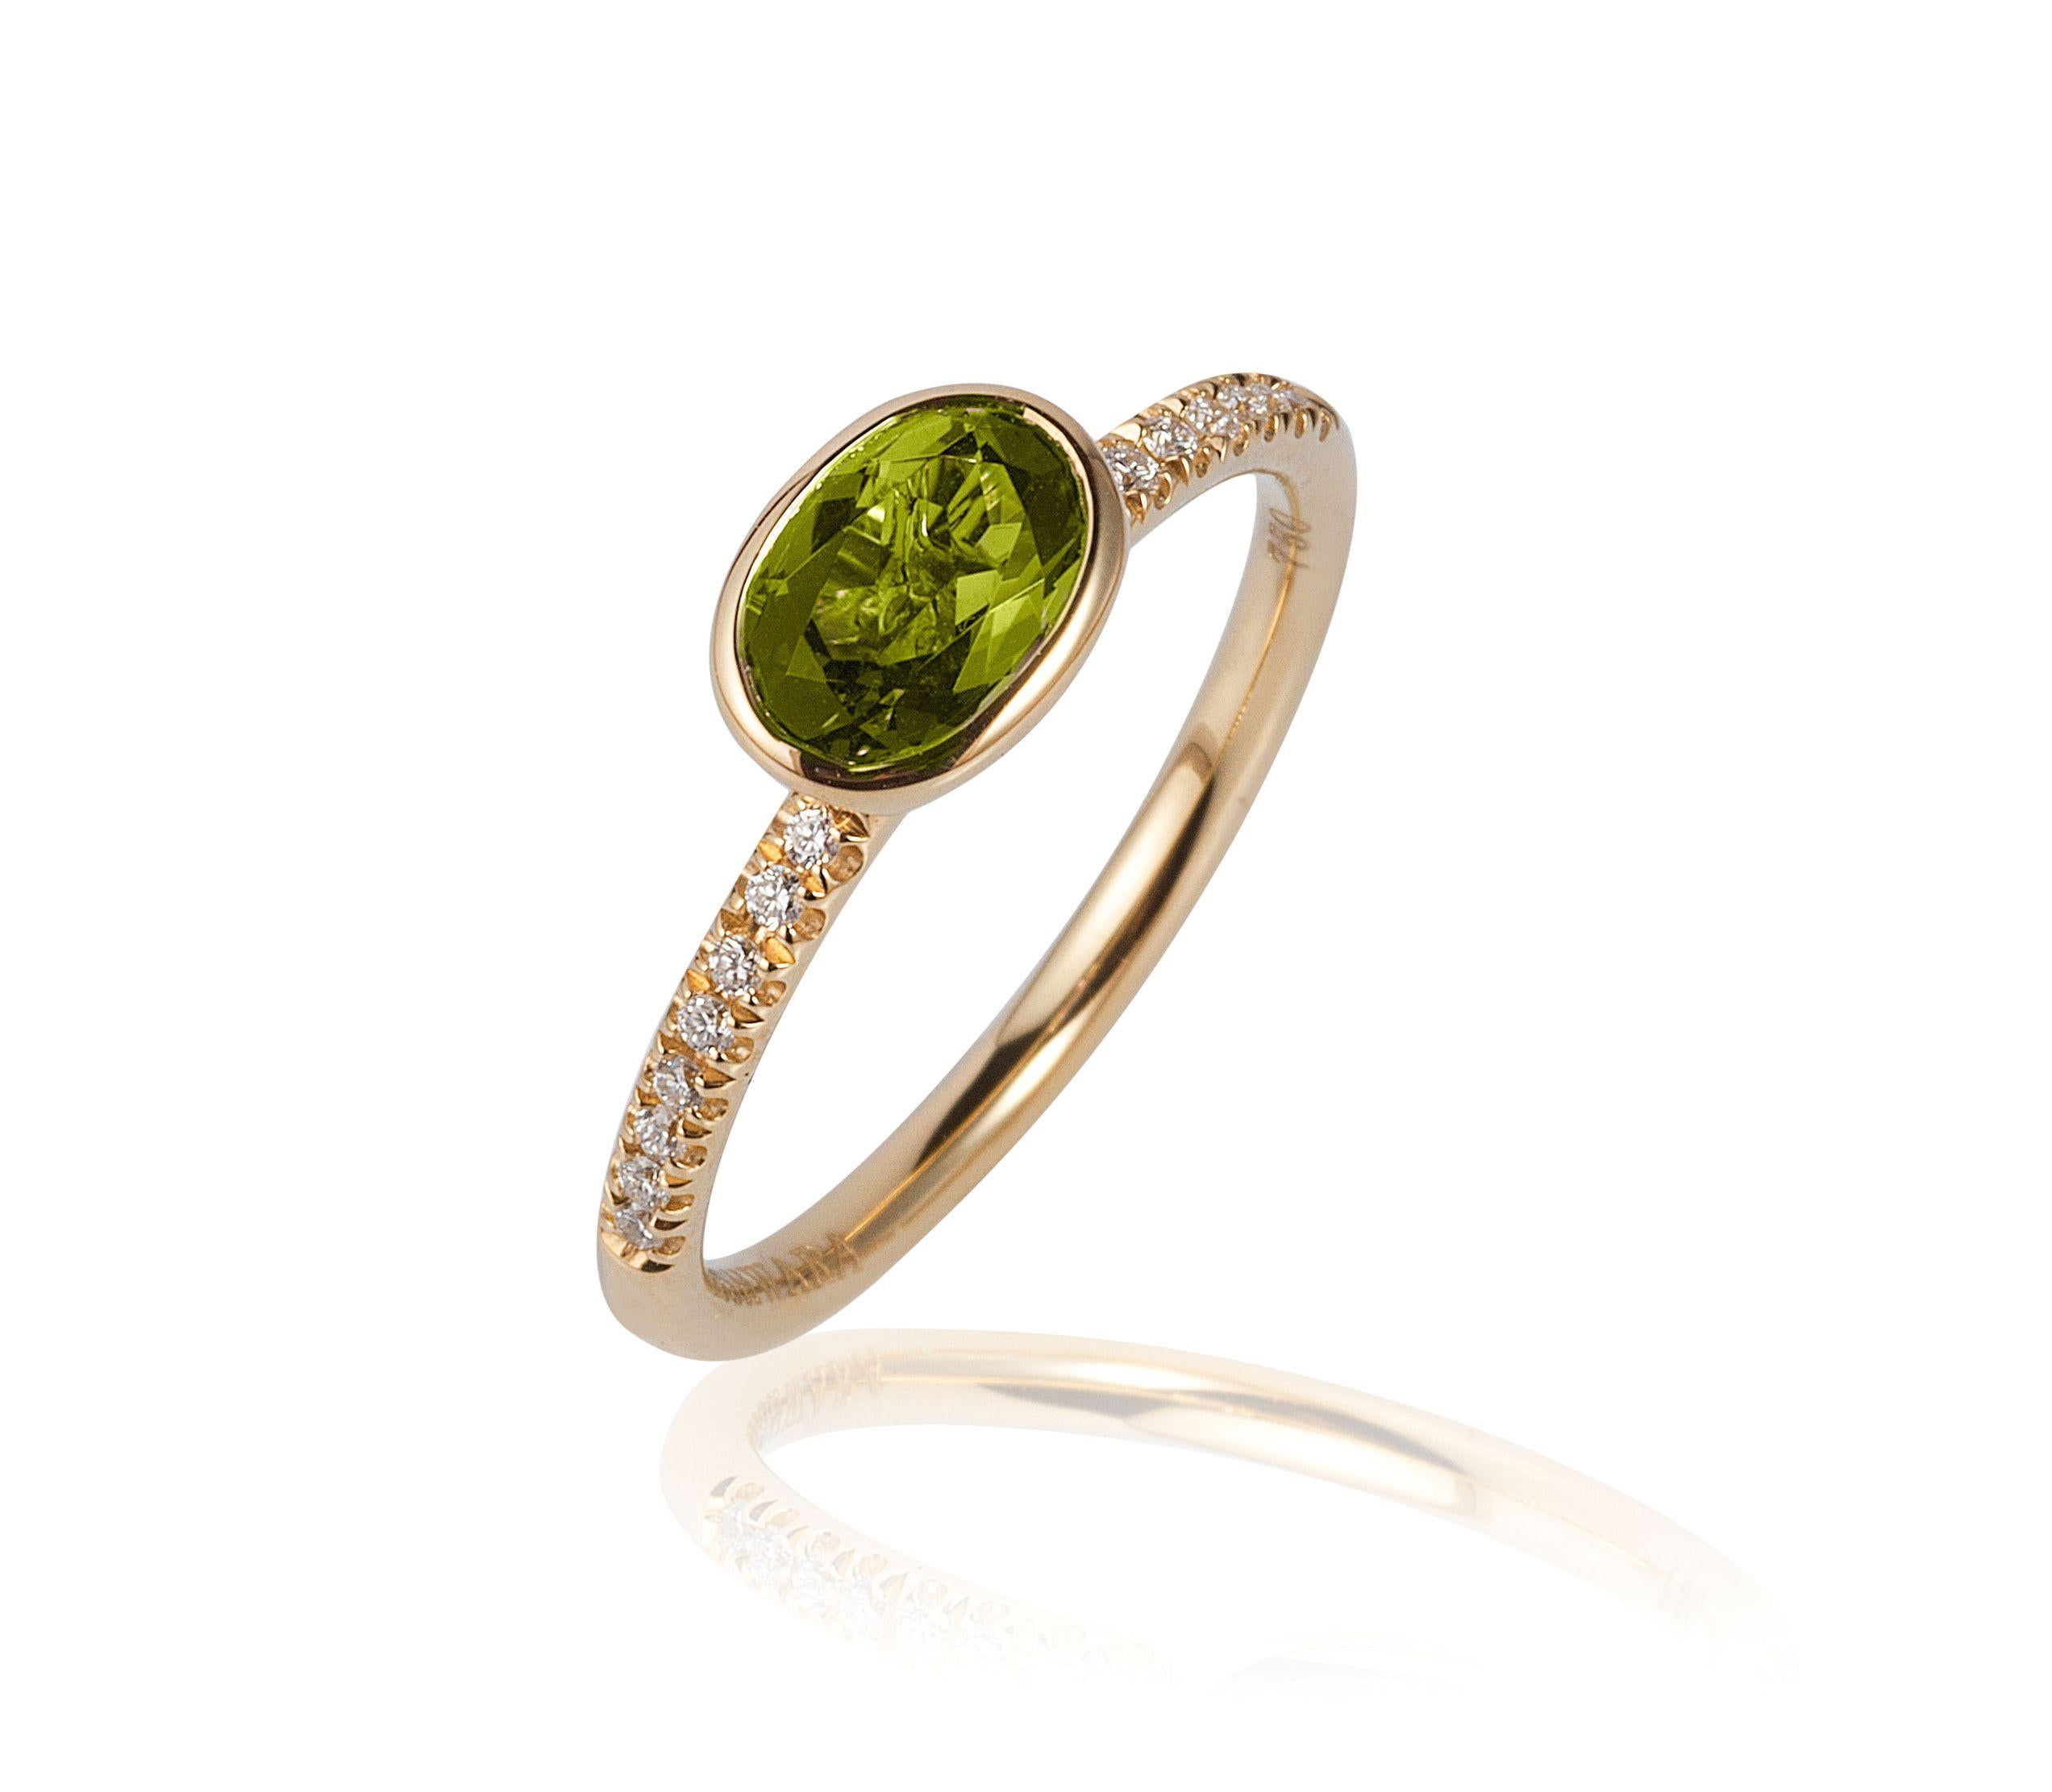 Peridot Faceted Oval Ring with Diamonds in 18K Yellow Gold, from ‘Gossip’ Collection
 
 Stone size: 7 x 5 mm
 
 Gemstone Approx. Wt: Peridot- 0.85 Carats
 
 Diamonds: G-H / VS, Approx. Wt: 0.08 Carats